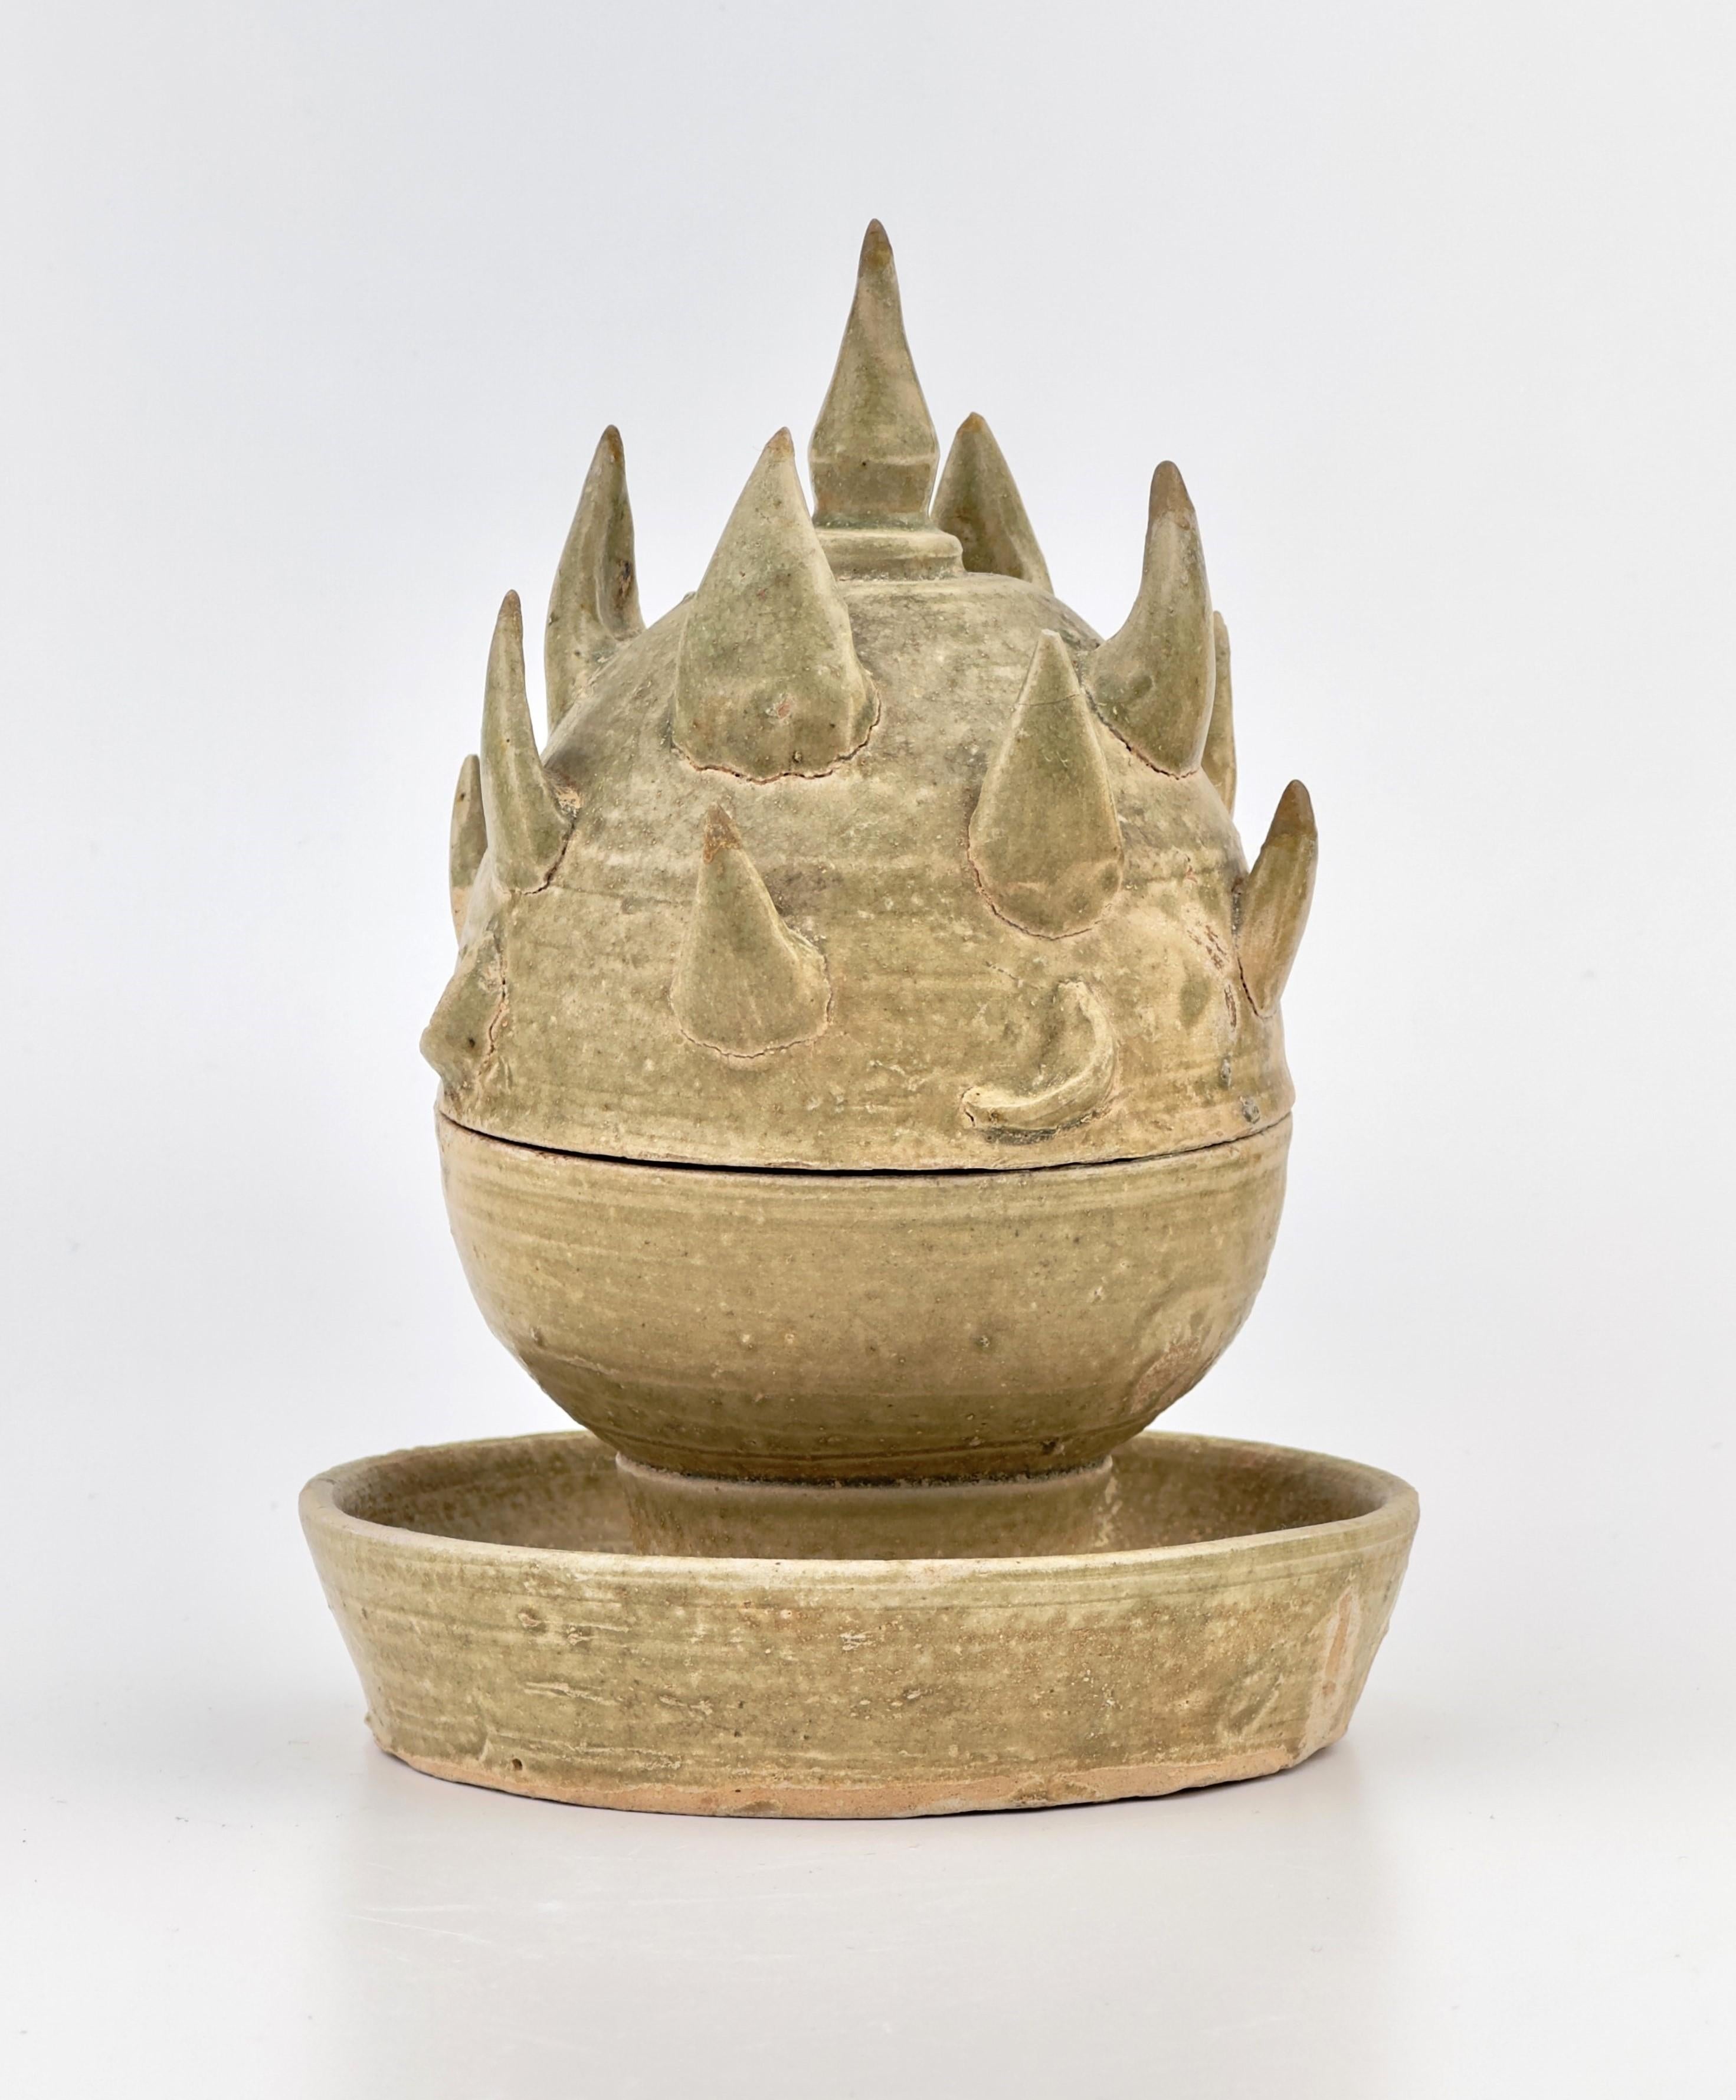 The Boshan incense burner is particularly notable among Han dynasty incense burners for its unique shape. Designed to resemble a mountain or even a mythical mountain, it is characterized by its pointed peaks that rise upwards. These peaks often